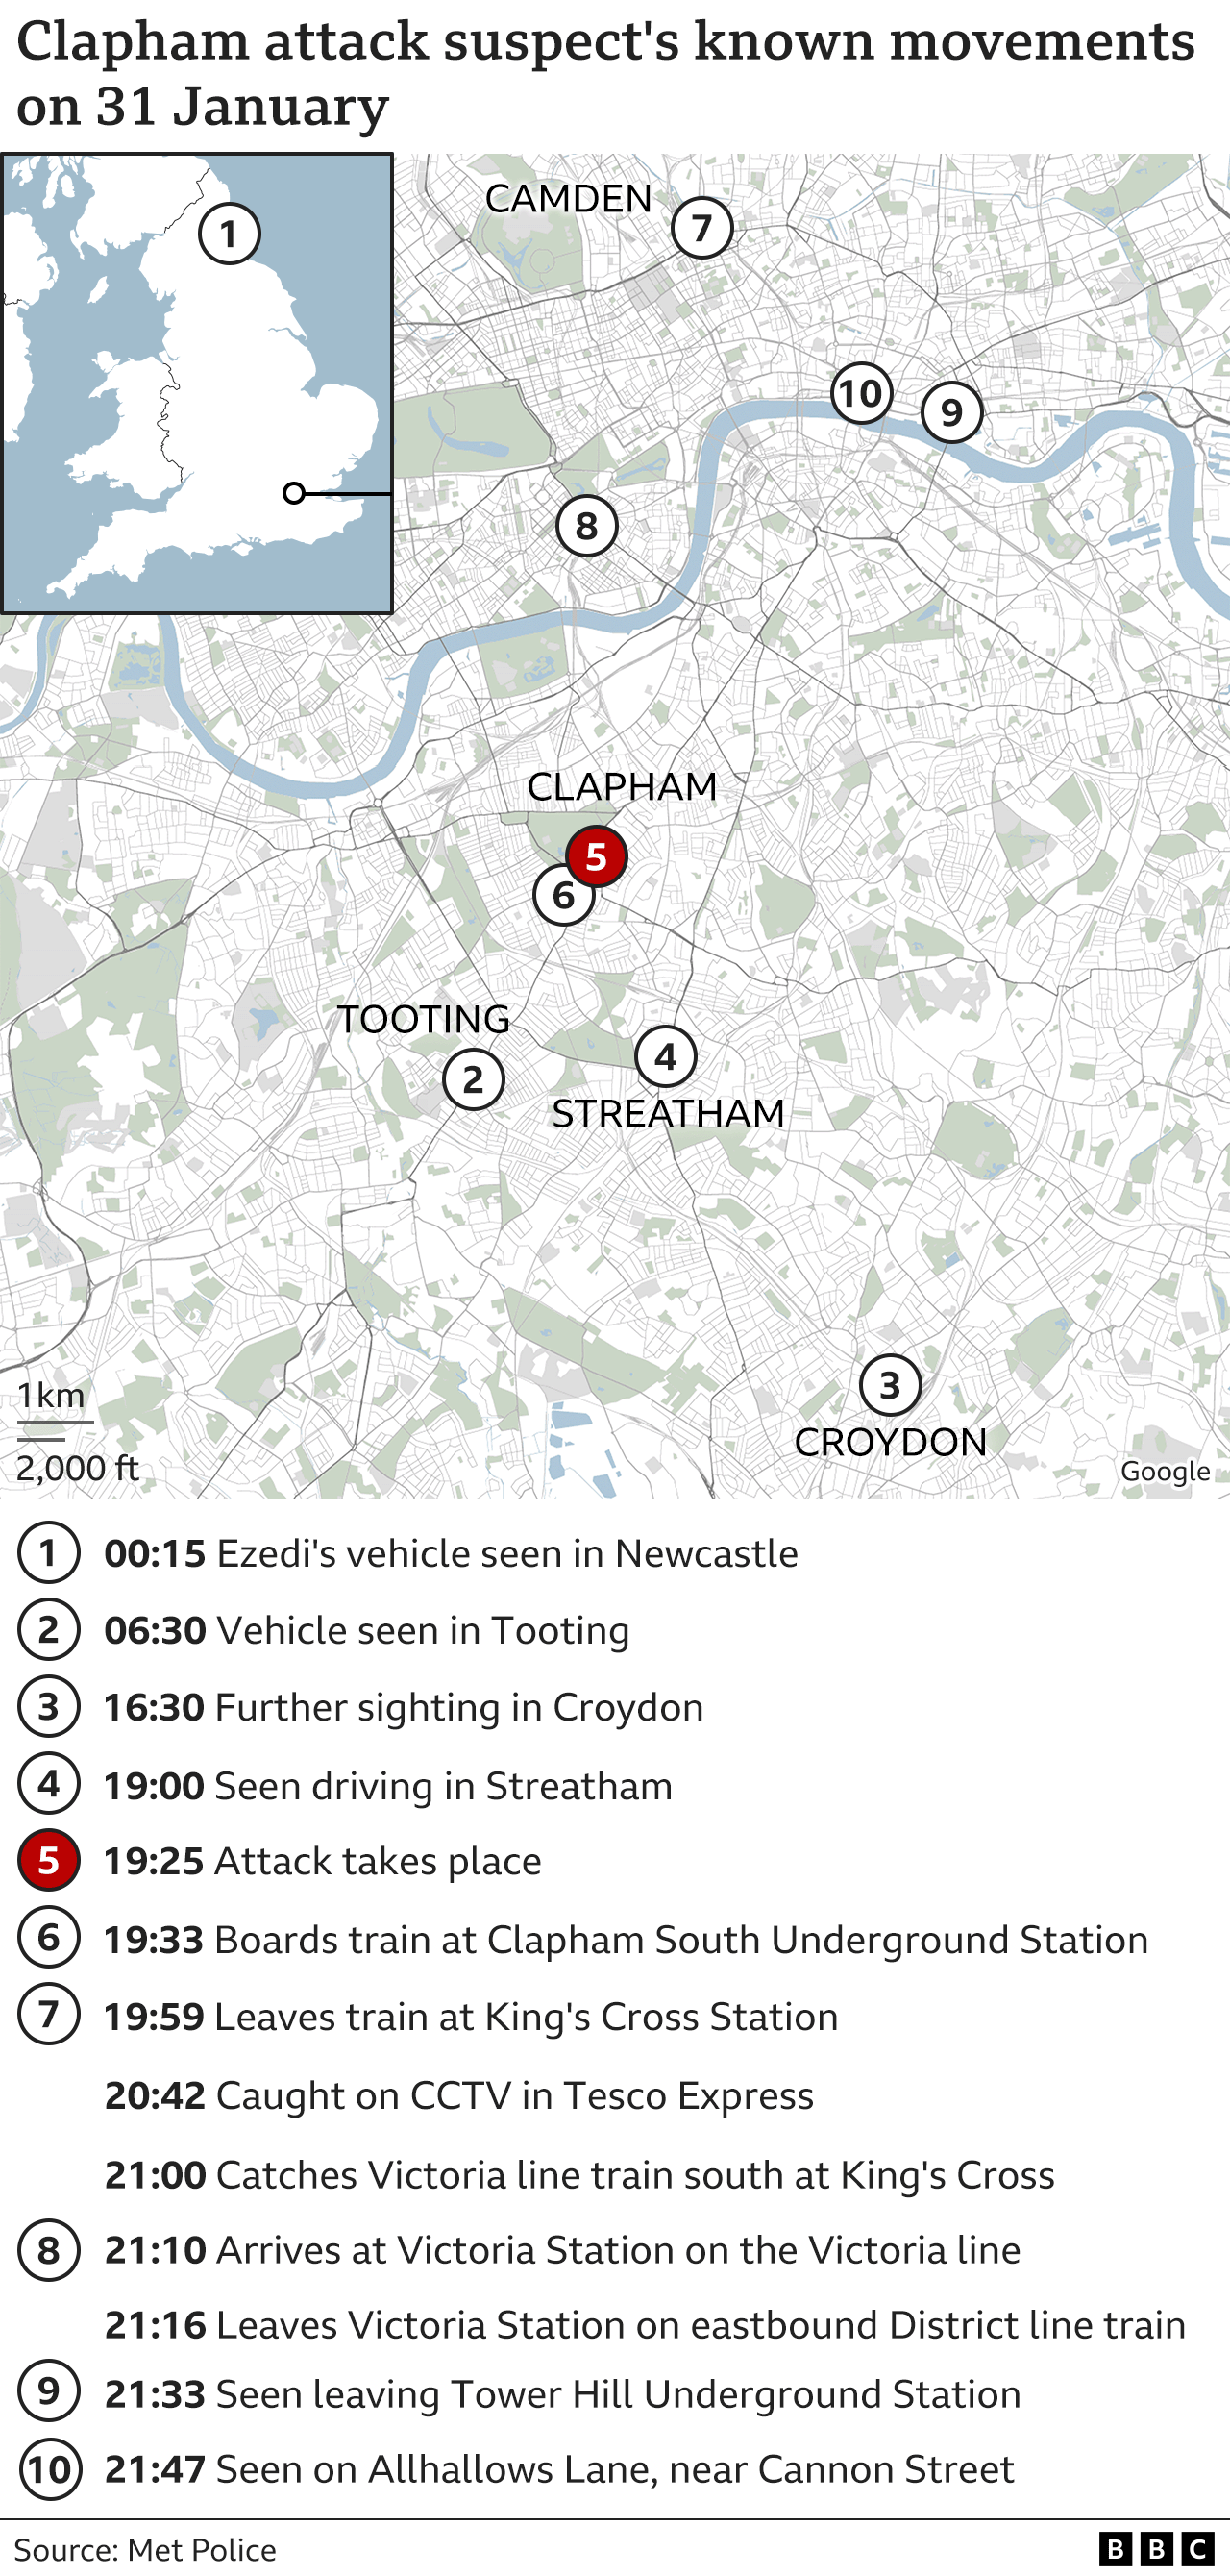 Map of Clapham attack suspect's known movements